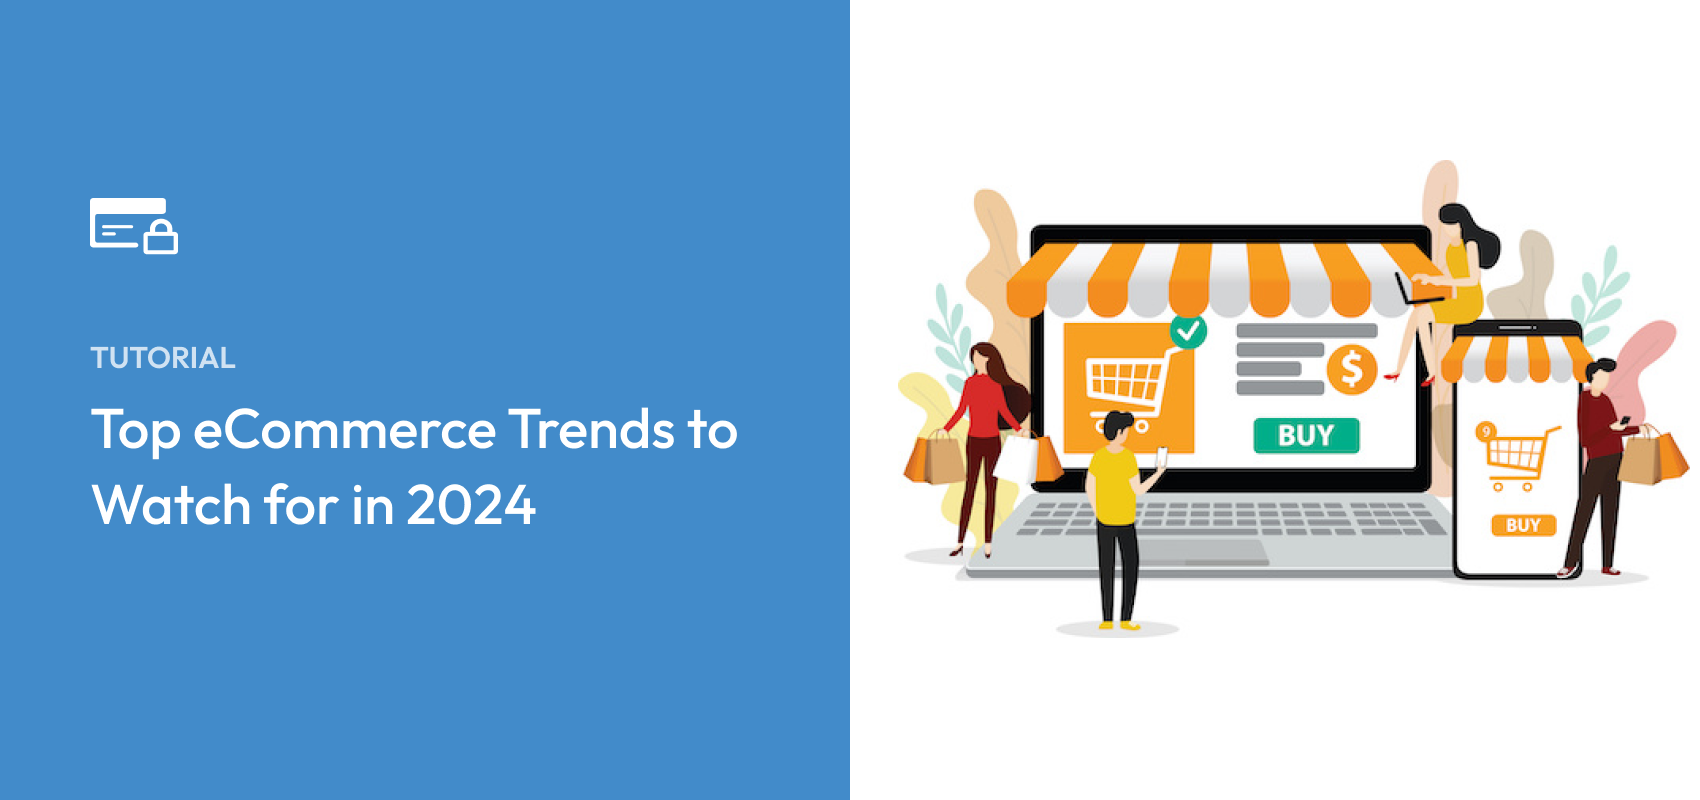 Top eCommerce Trends to Watch for in 2024